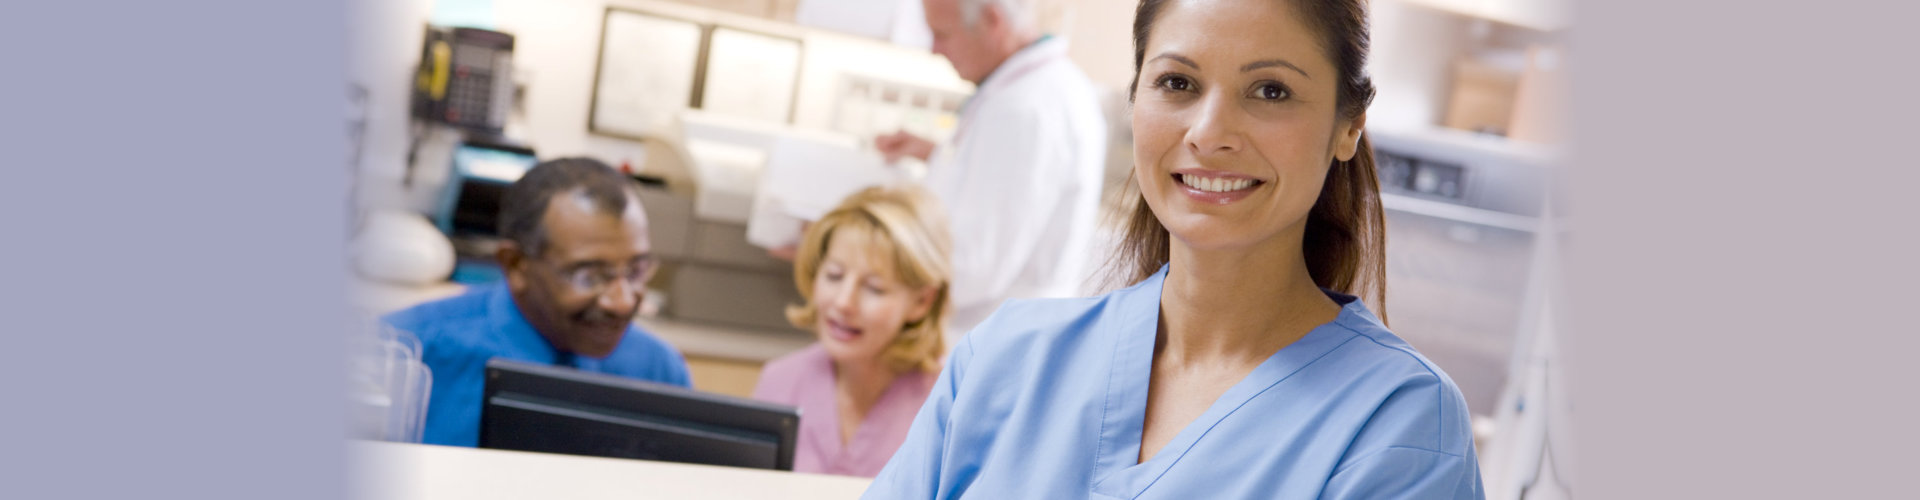 nurse smiling in front of elderly couple